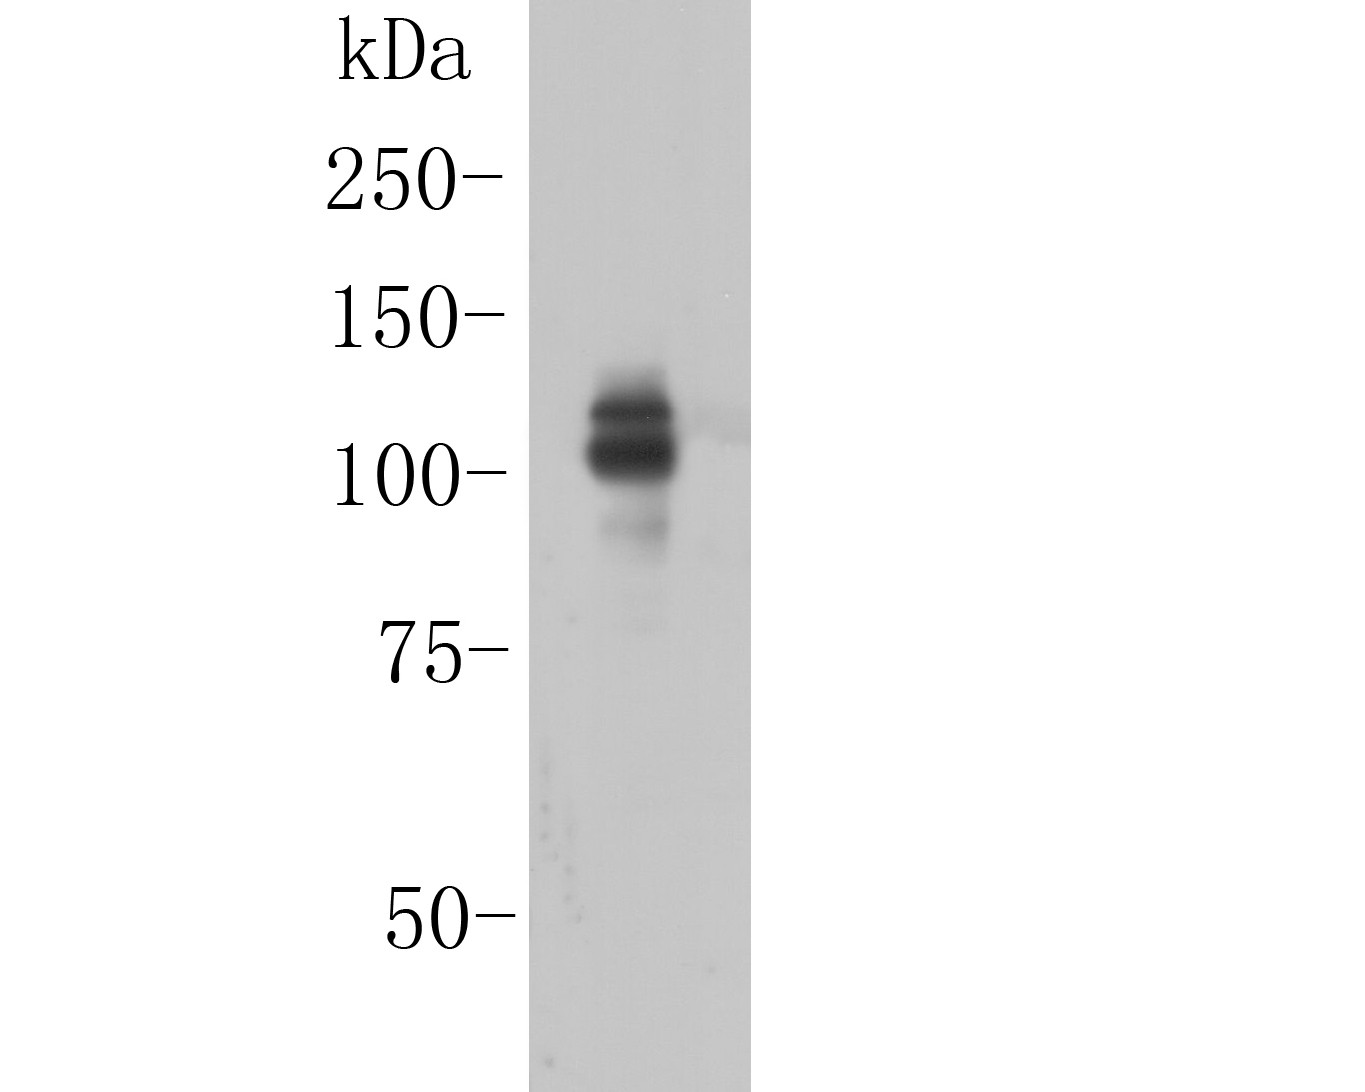 Western blot analysis of ITCH on Siha cell  lysate. Proteins were transferred to a PVDF membrane and blocked with 5% BSA in PBS for 1 hour at room temperature. The primary antibody (ER1901-94, 1/2000) was used in 5% BSA at room temperature for 2 hours. Goat Anti-Rabbit IgG - HRP Secondary Antibody (HA1001) at 1:5,000 dilution was used for 1 hour at room temperature.